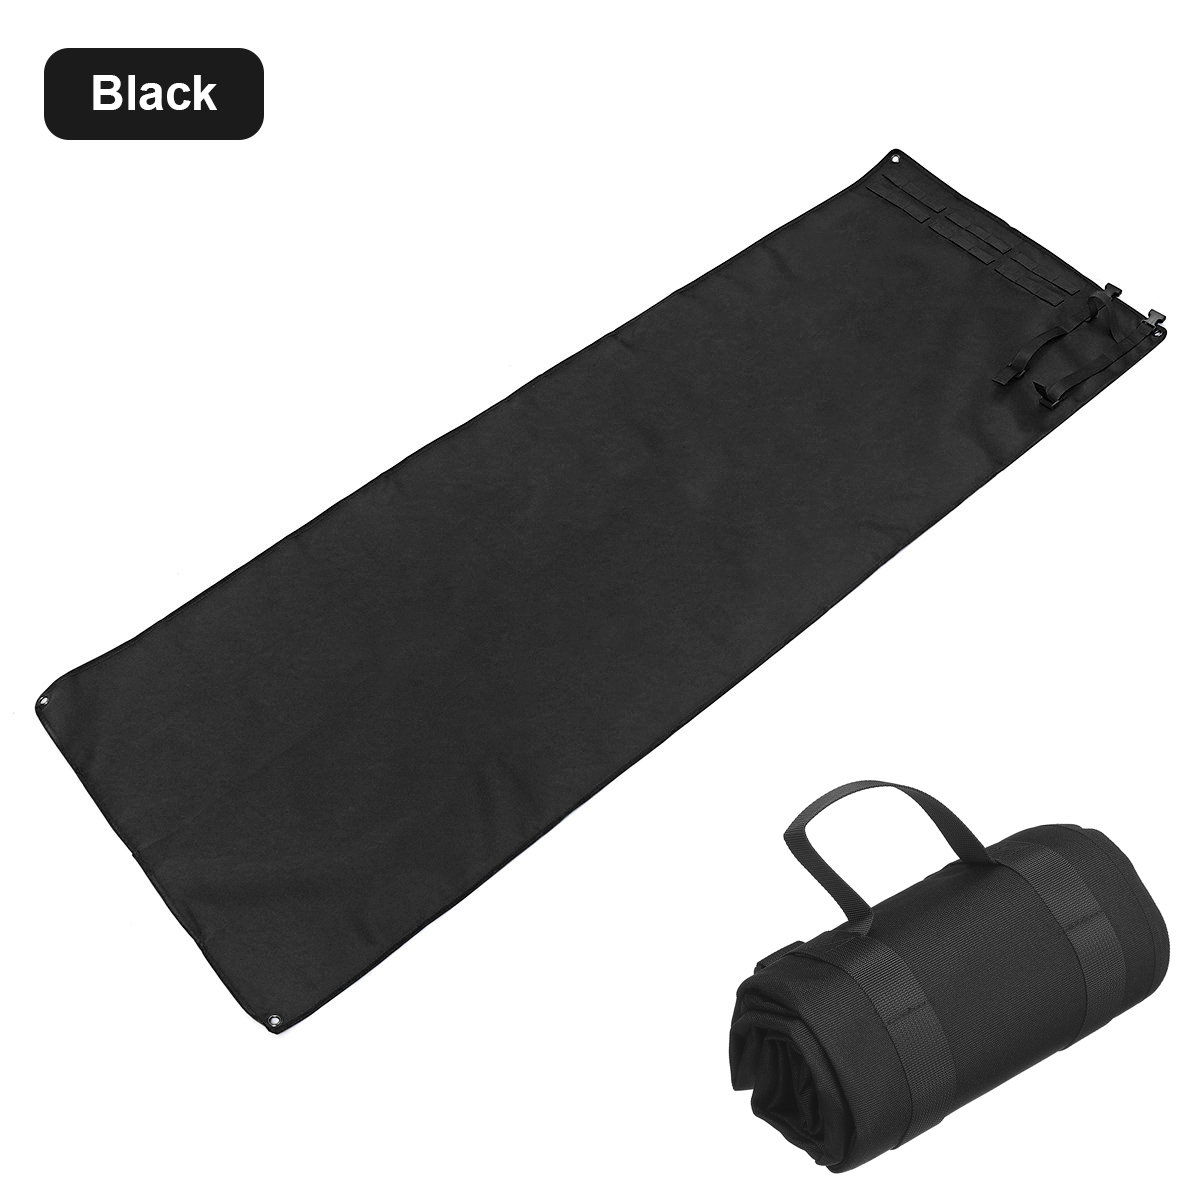 Picnic-Camping-Mat-Foldable-Roll-Up-Mat-Foldable-Portable-Non-Slip-Durable-Rest-Outdoor-Camping-Picn-1882342-10